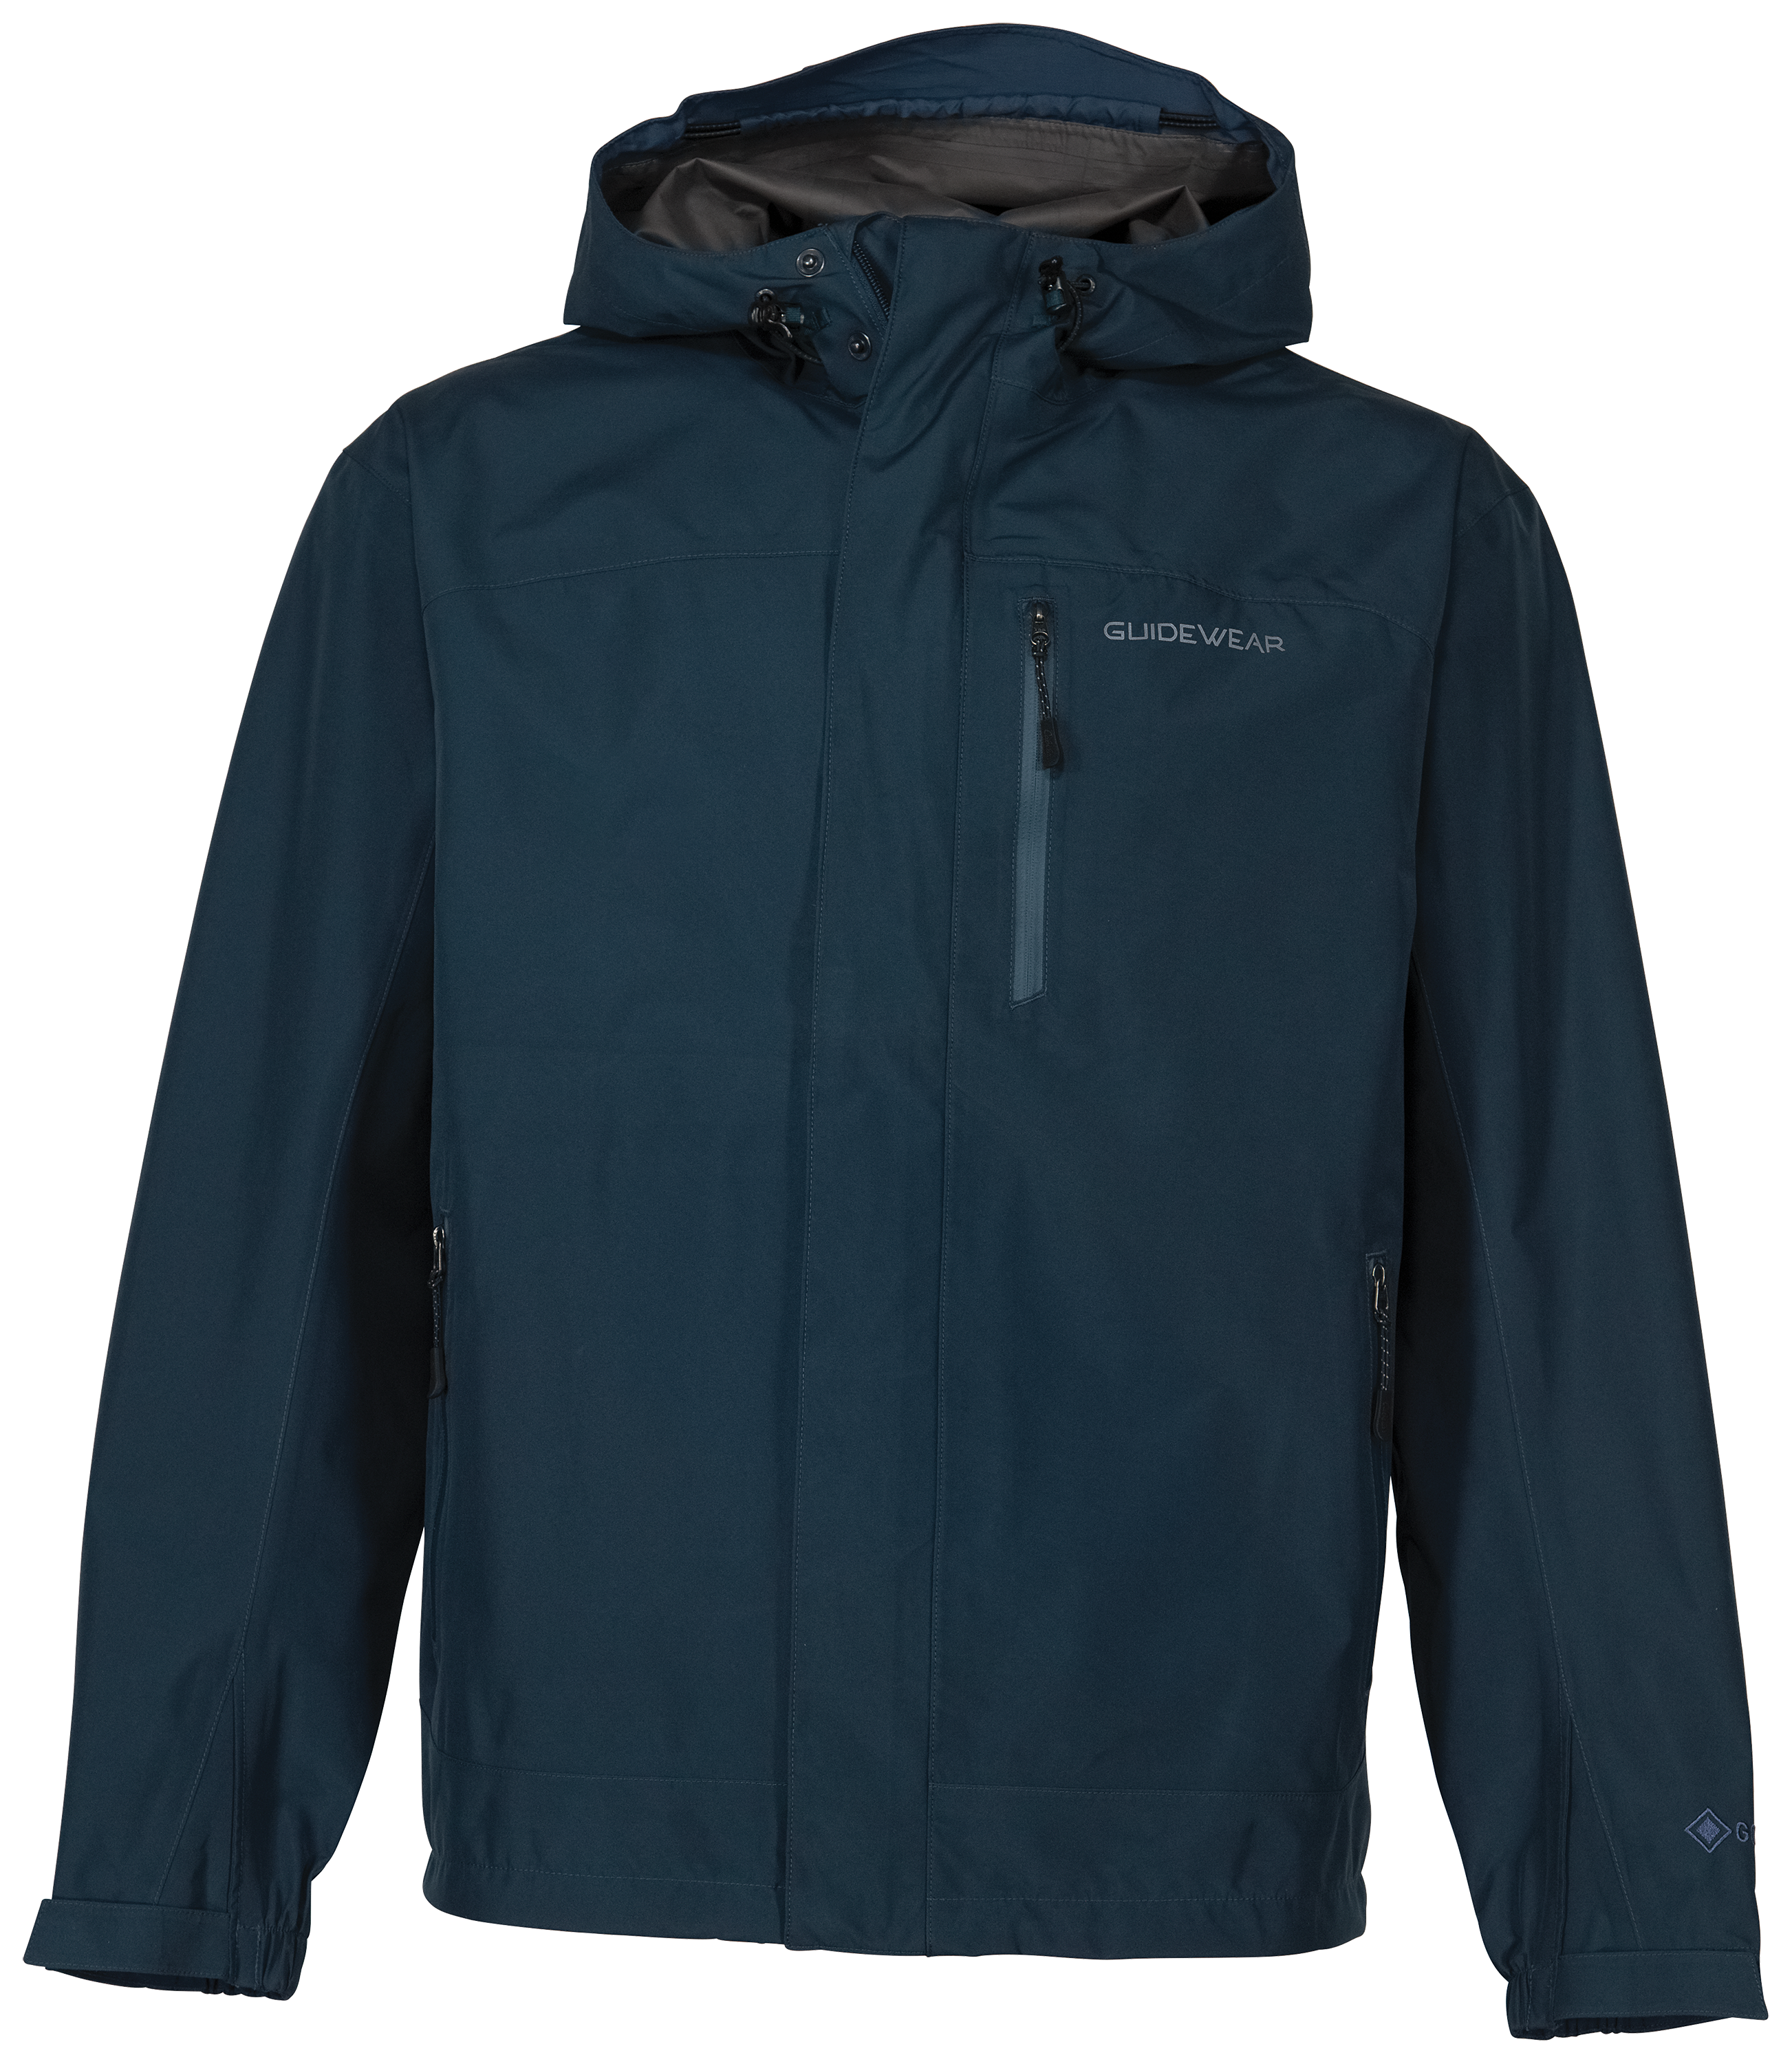 Johnny Morris Bass Pro Shops Guidewear Rainy River Jacket with GORE-TEX PacLite for Men - Shadow Blue - 3XLT